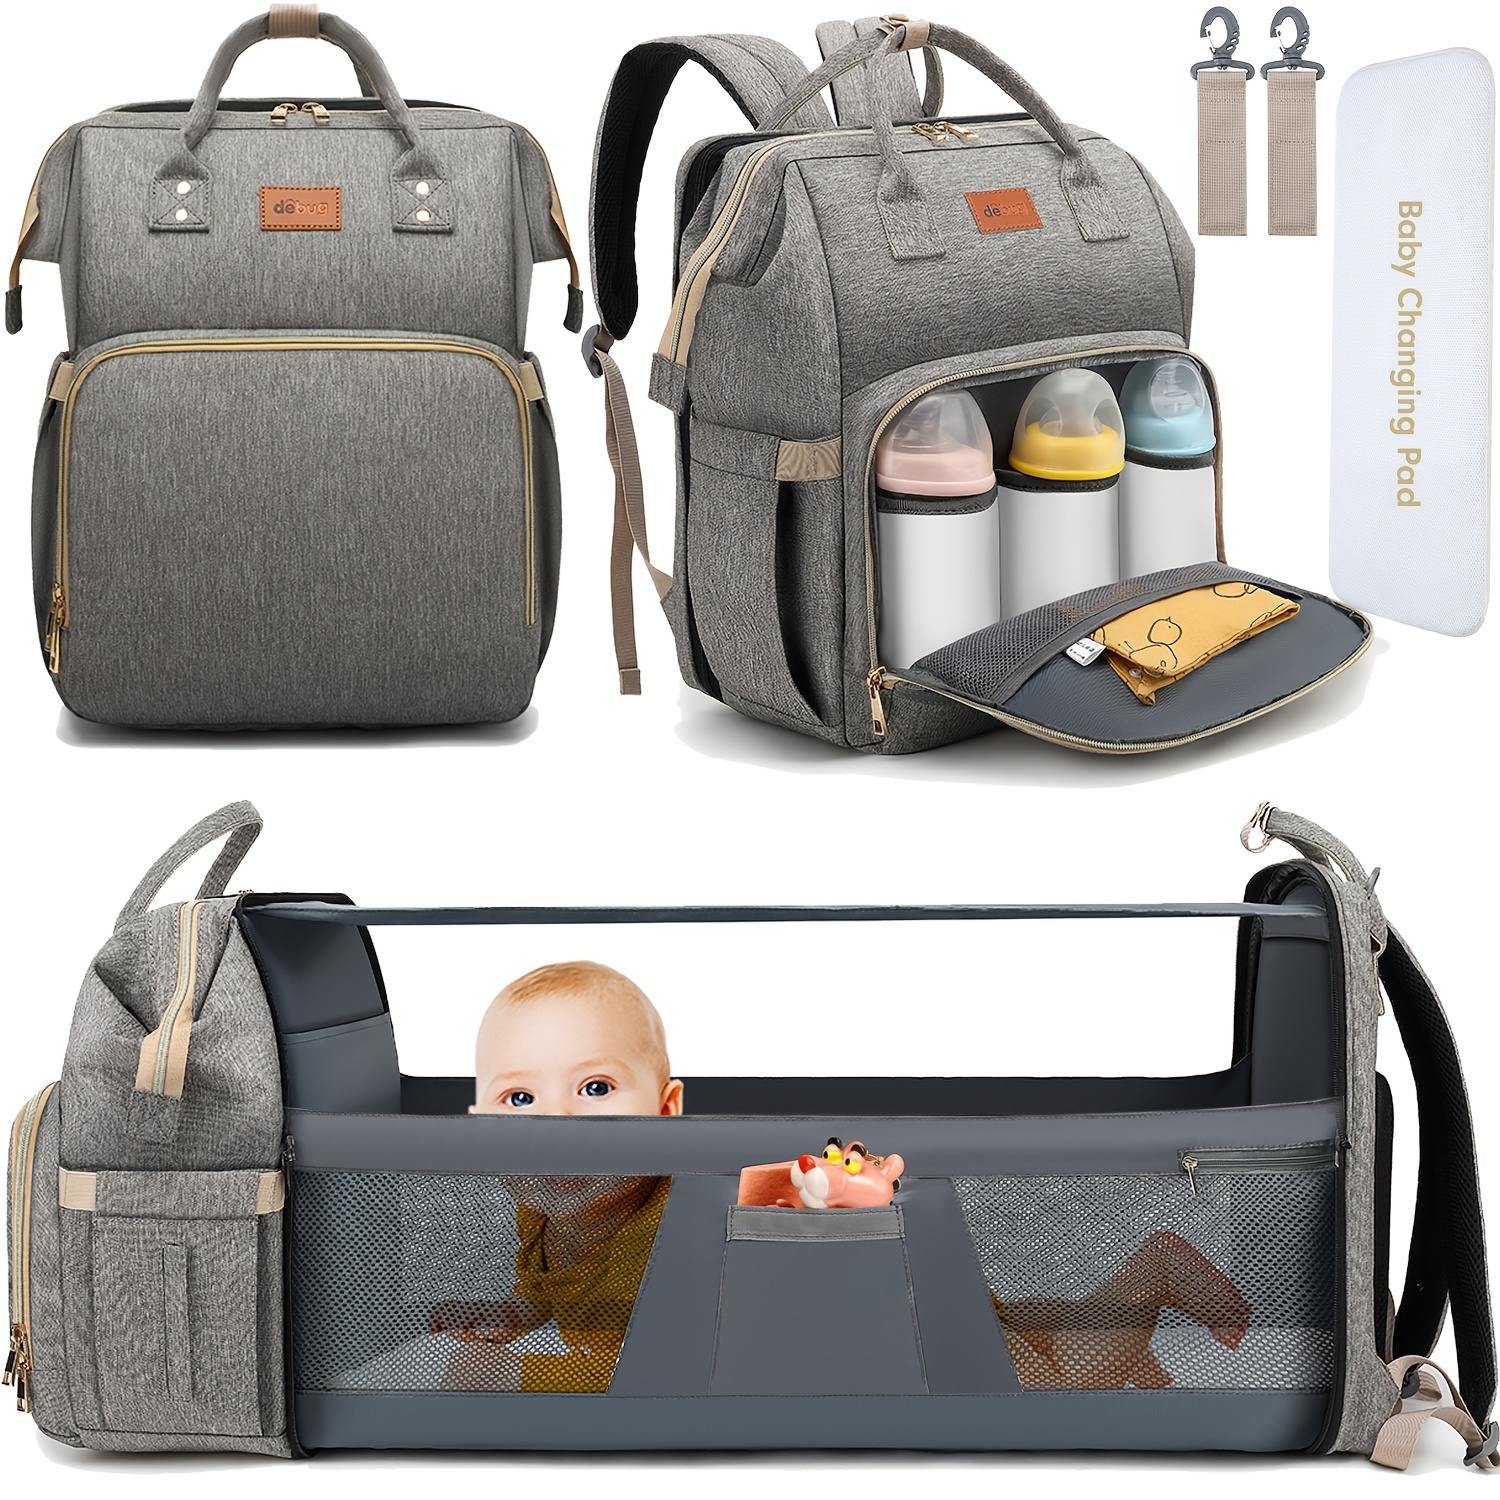 SHK Digitrade Baby Diaper Bag Backpack with Changing Station Diaper Bags  for Baby Bags for Boys Girl Diaper Bag Black Diaper Bag backpack  Buy Baby  Care Products in India  Flipkartcom